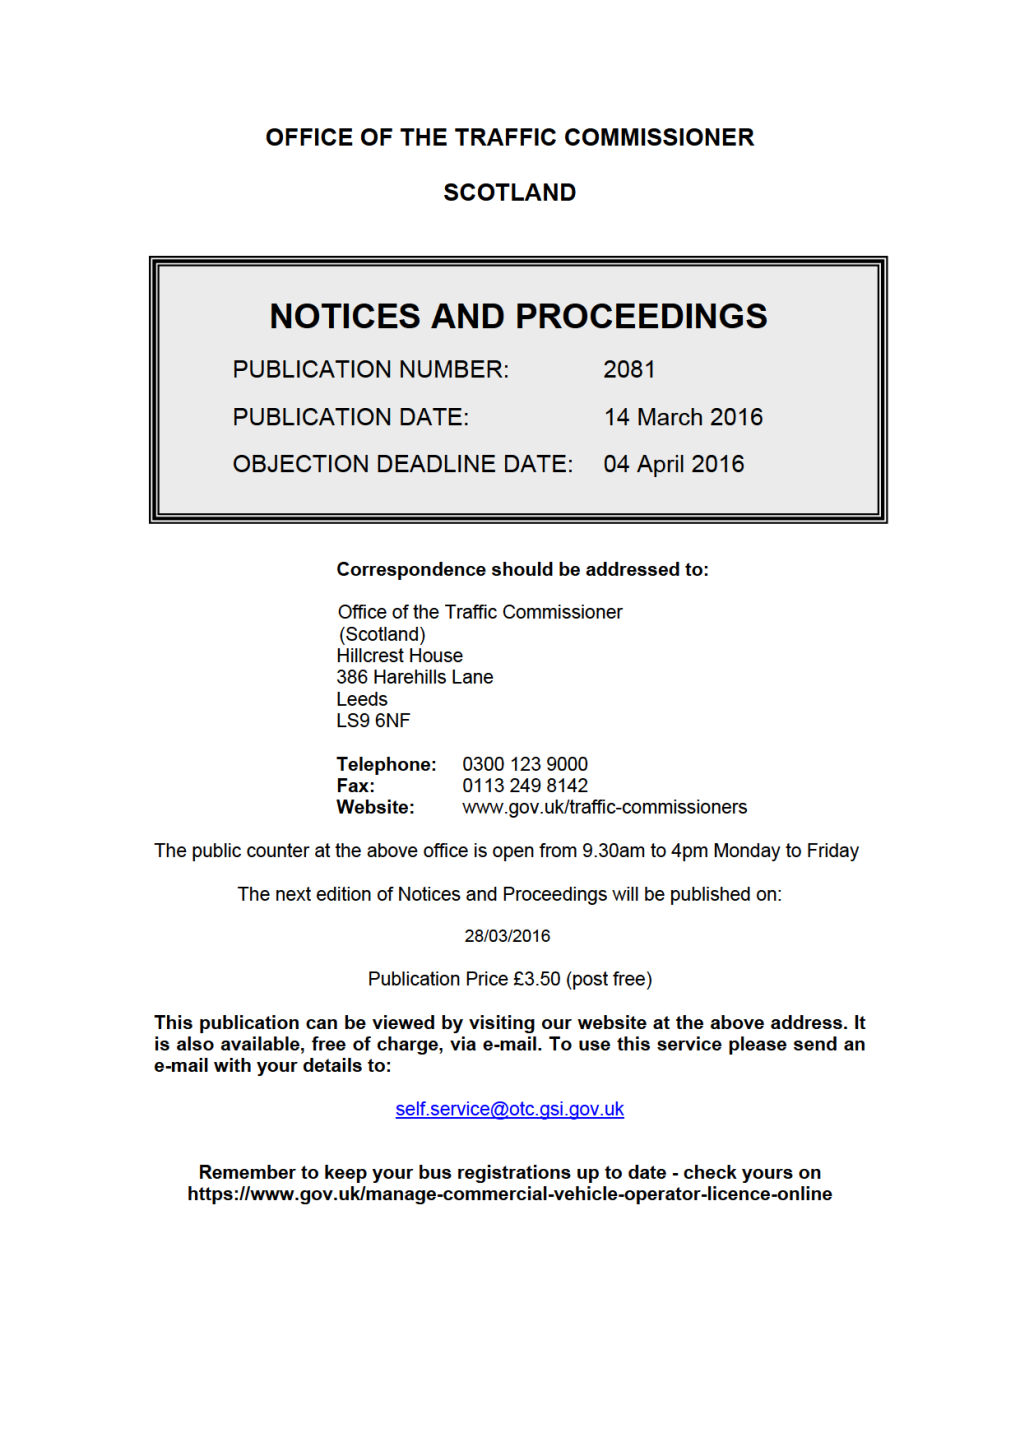 NOTICES and PROCEEDINGS 14 March 2016